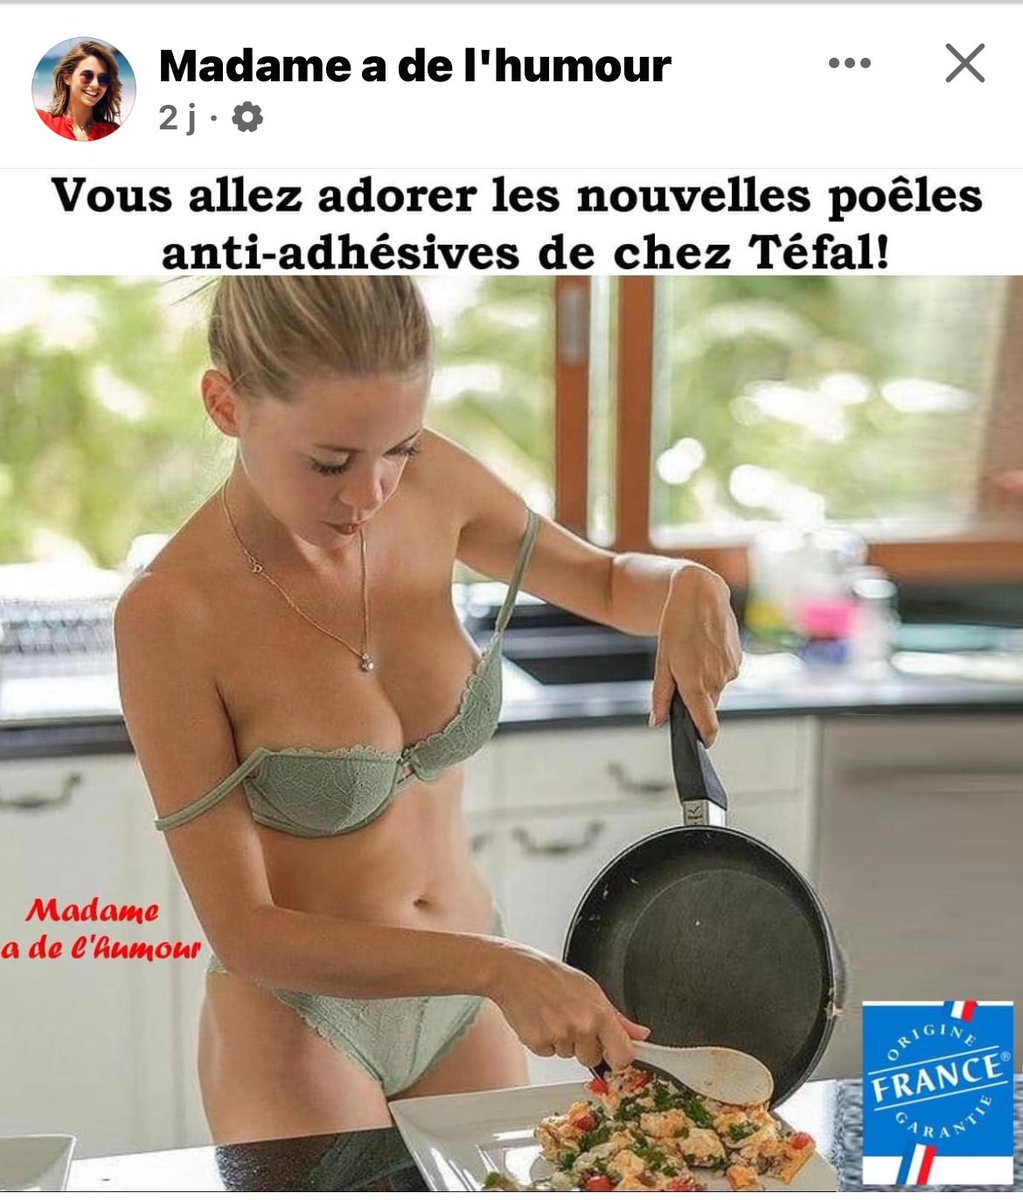 #Tefal #MadeInFrance 
On adore 😍